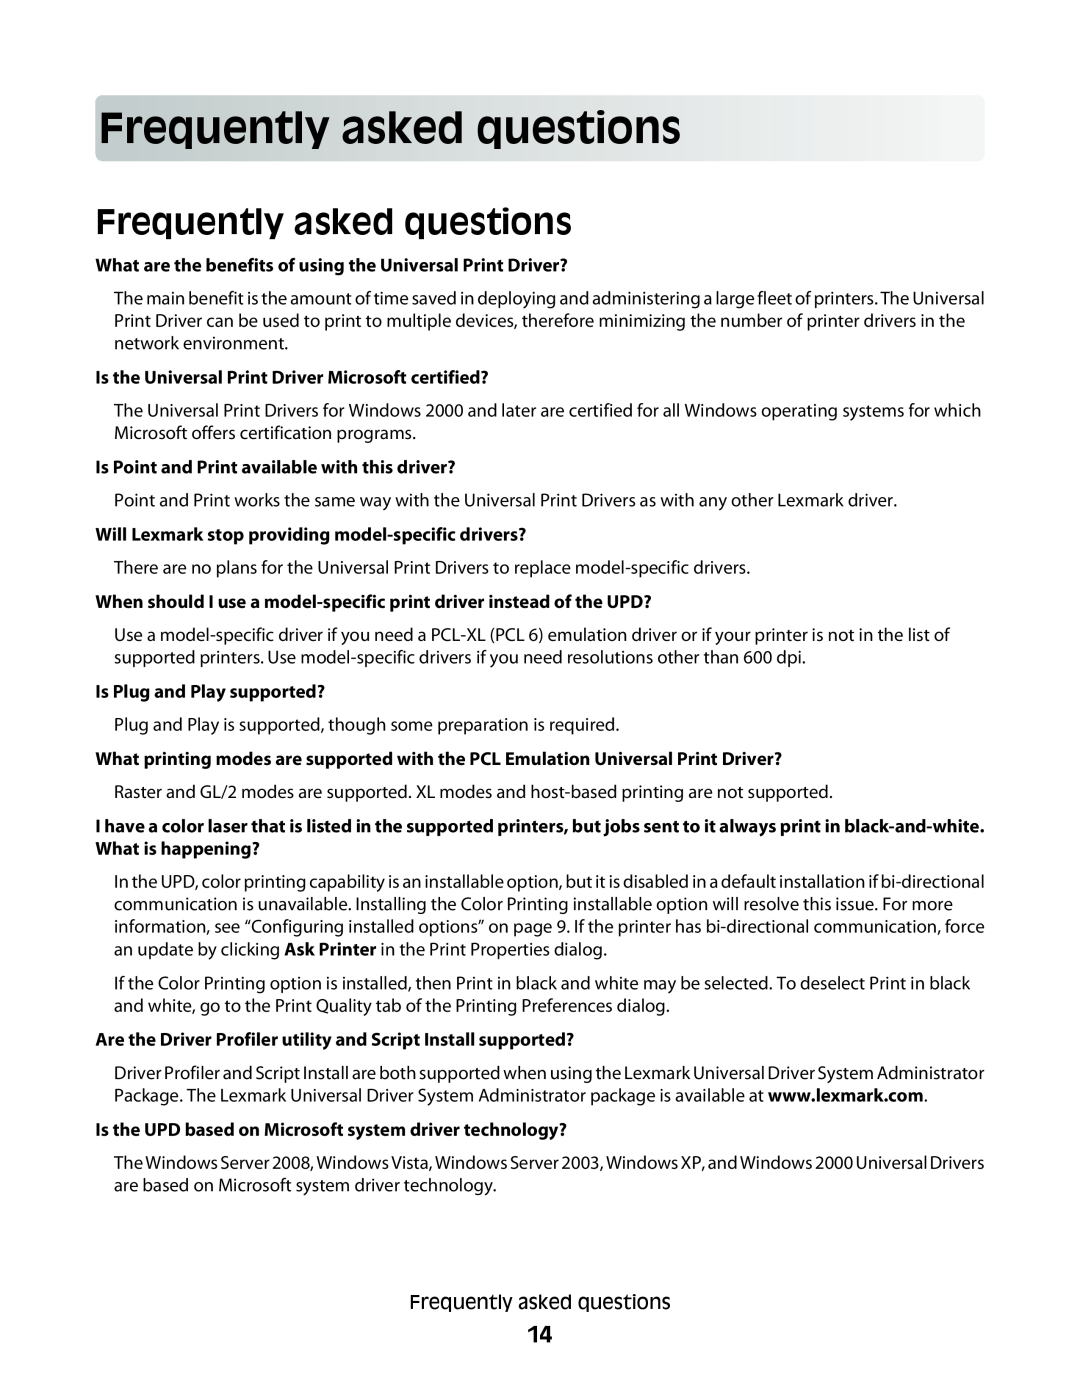 Lexmark Universal Driver manual Frequentlyaskedquestions, Frequently asked questions 